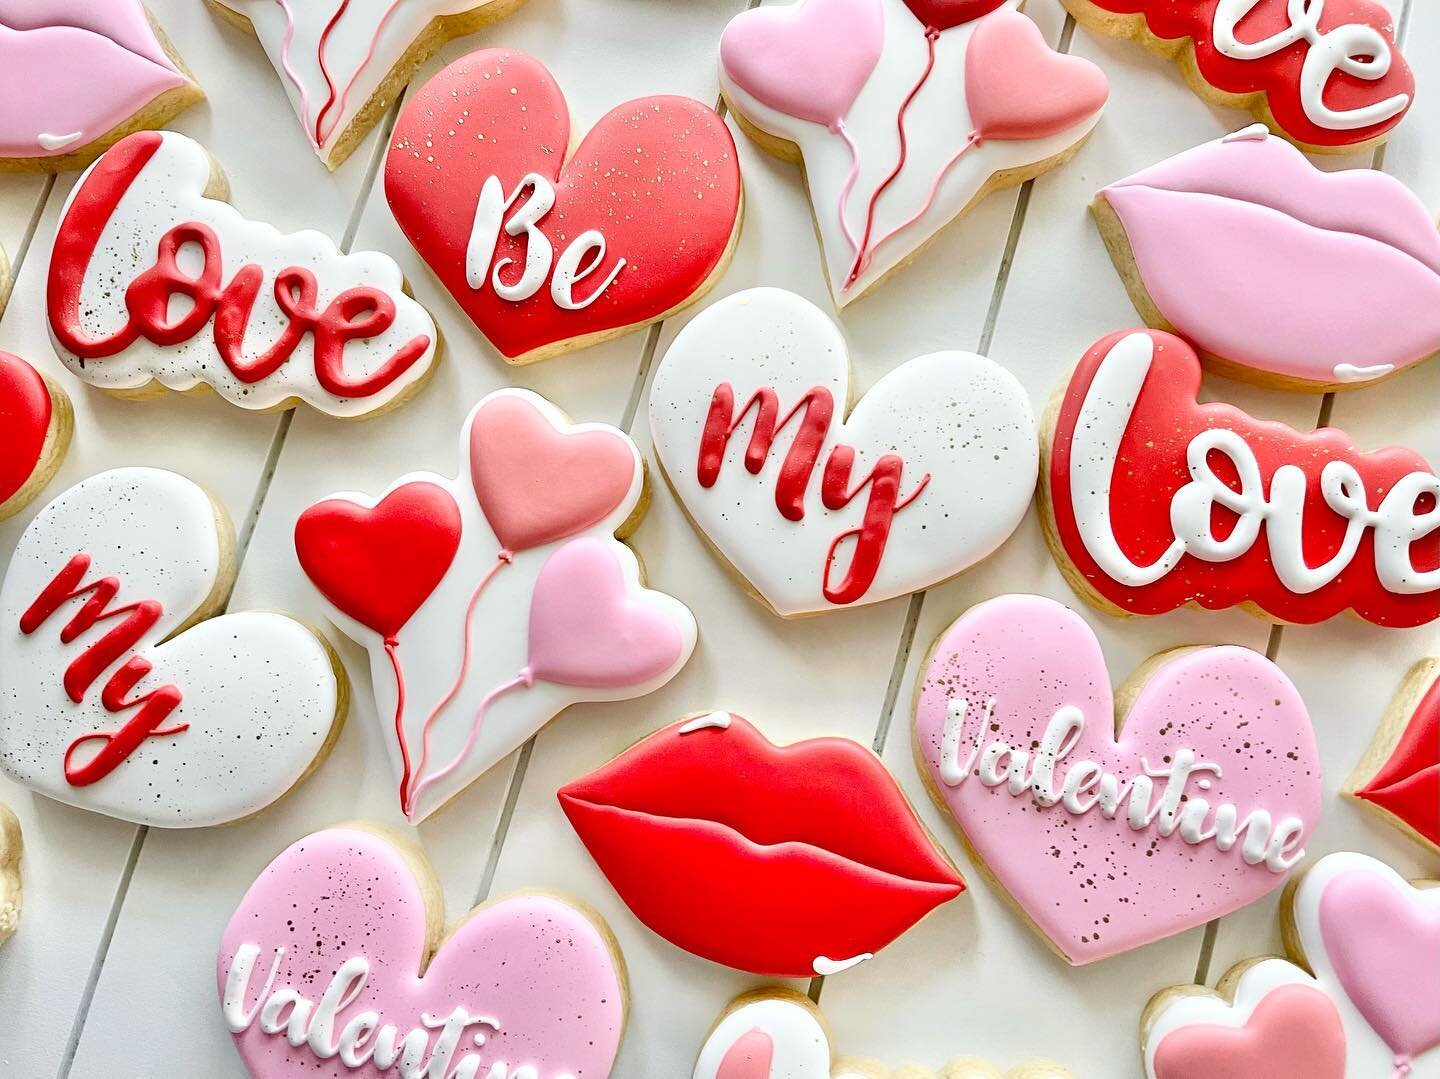 Very belated Valentine&rsquo;s Day post! ❤️❤️. I hope you all had an awesome V-day! 
.
.
.
.
.
#valentines #happyvalentinesday #valentinescookies #lips #redlips #sugarcookies #tampa #tampabay #tampacookies #tampasugarcookies #tampabaker #tampabakery 